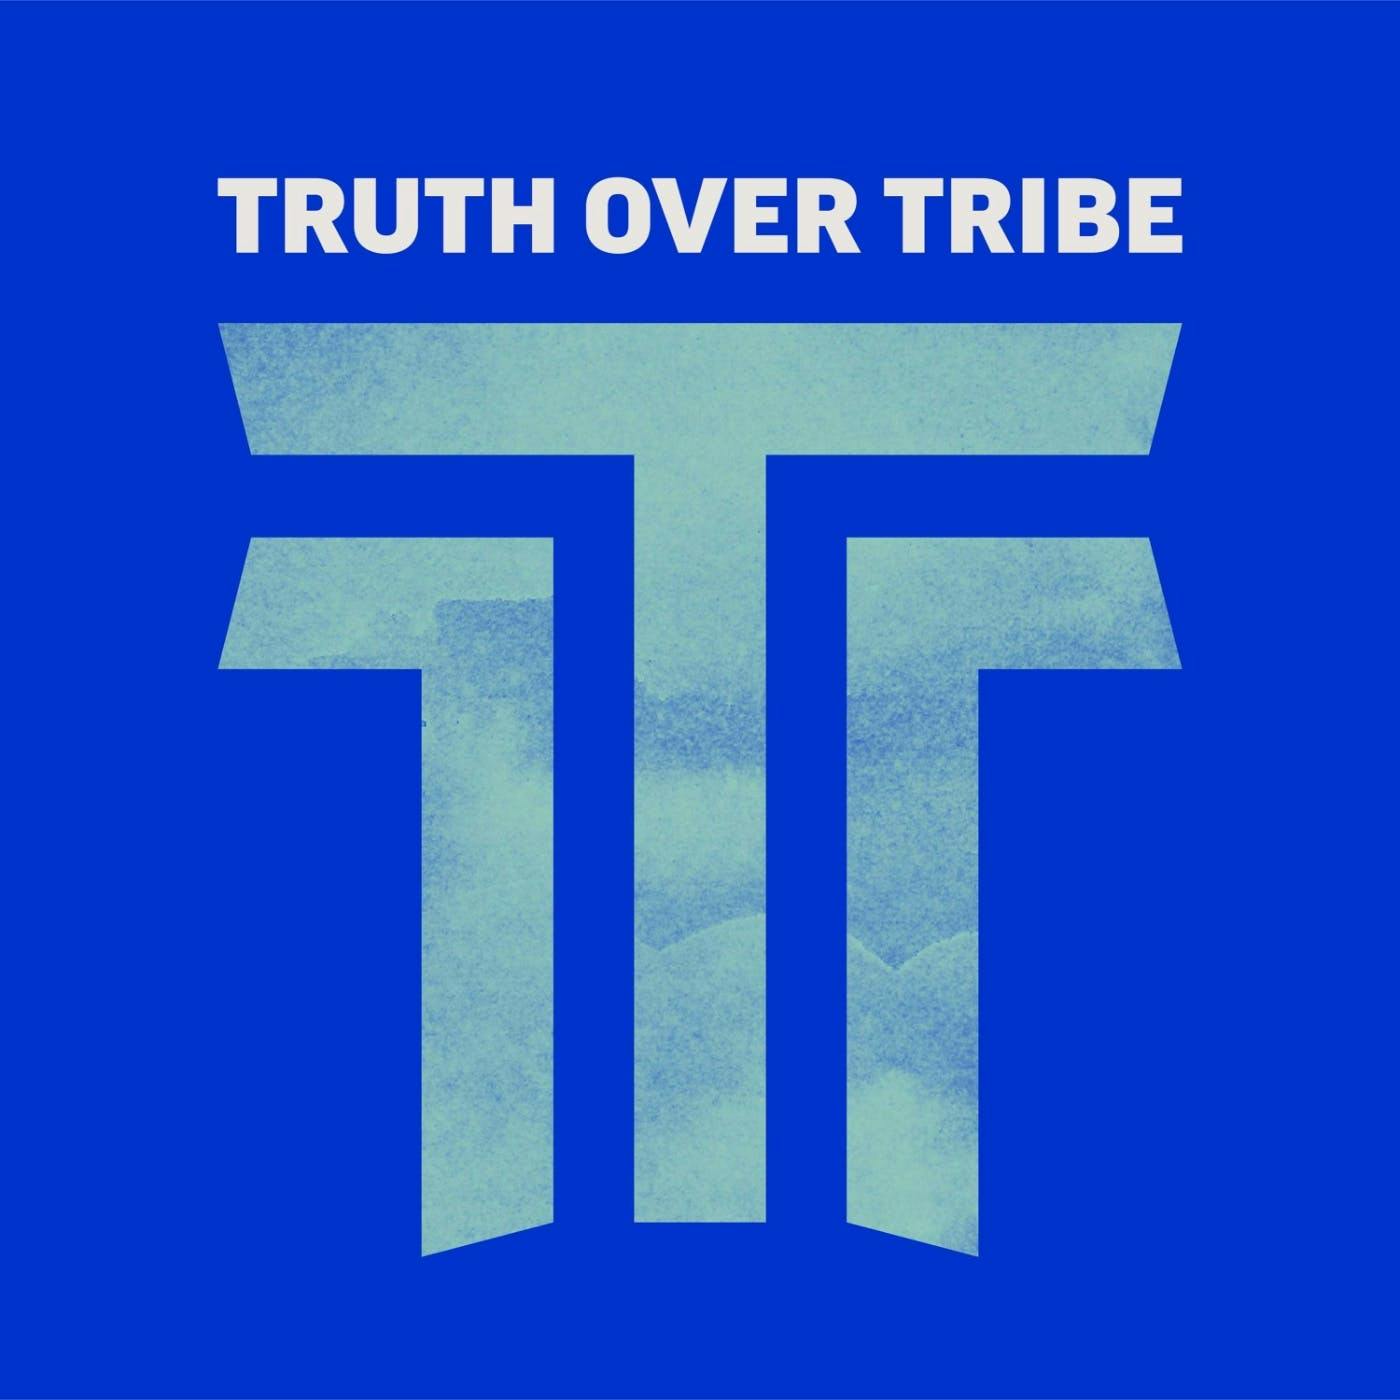 Truth Over Tribe: Christian Takes on Culture, News & Politics:Culture, News & Politics from Christians, not Partisans